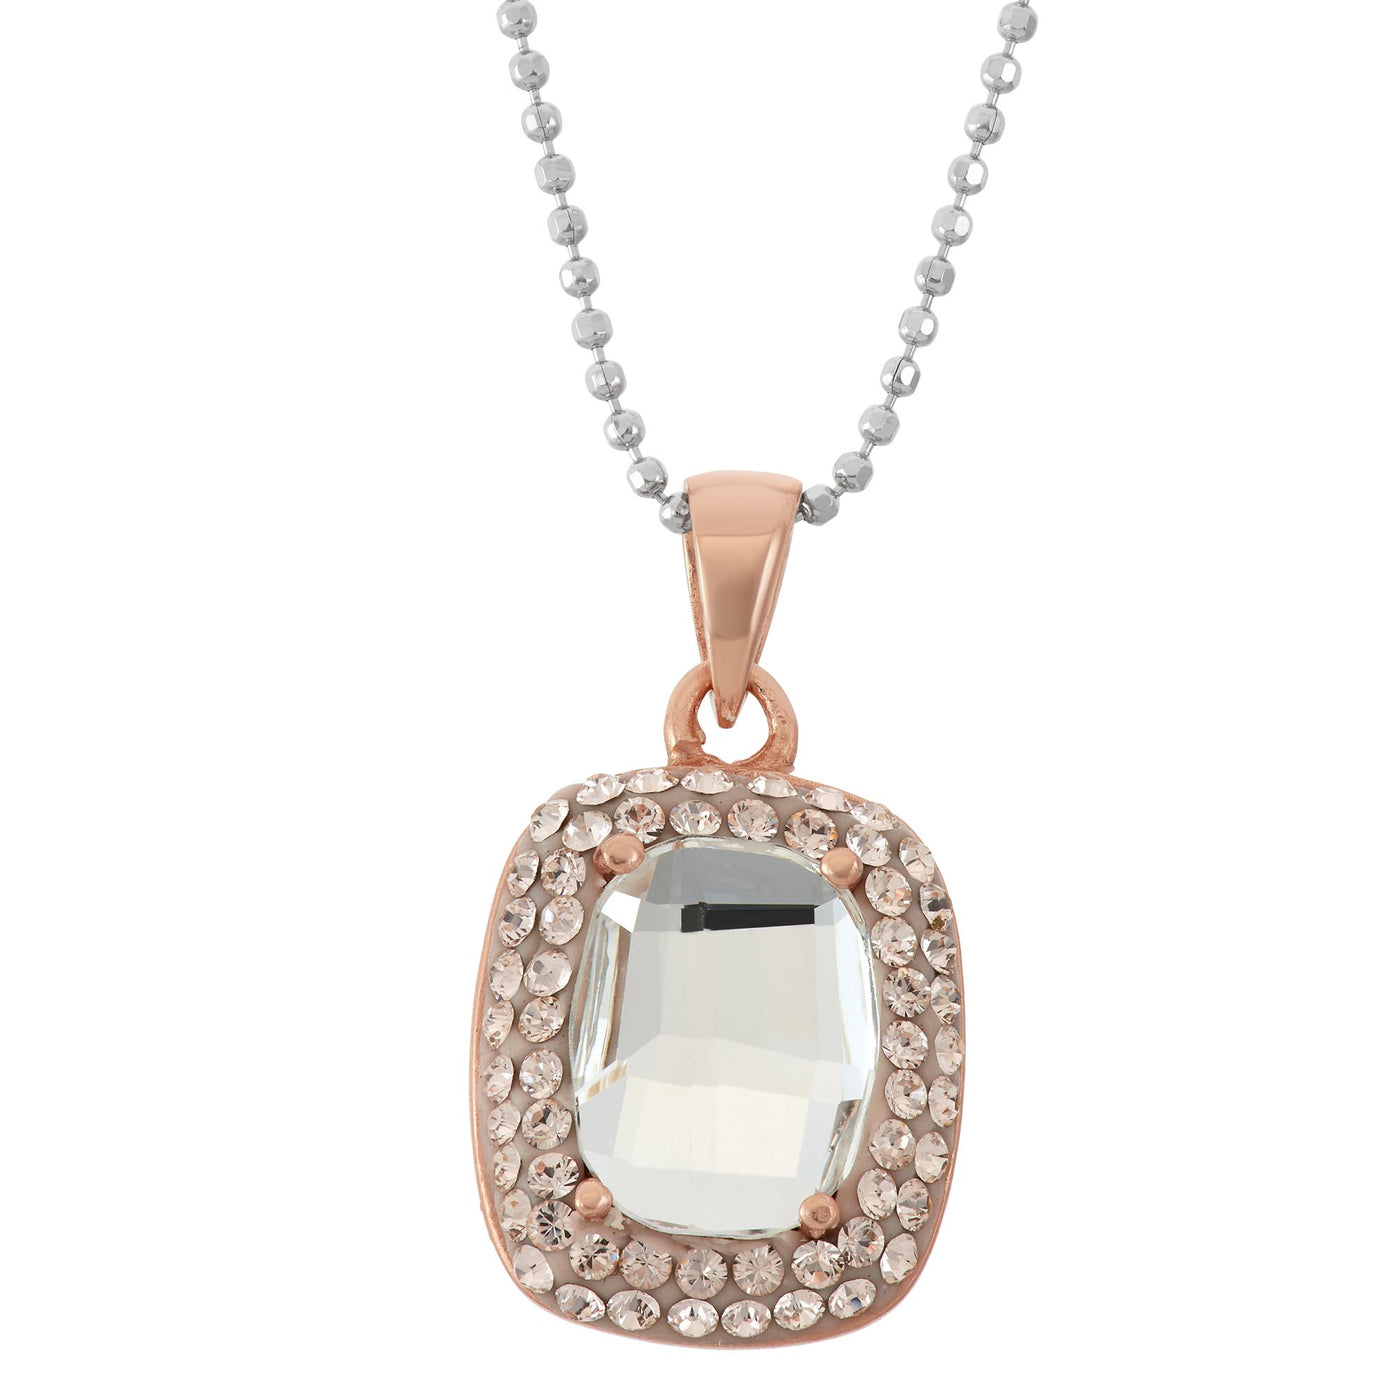 Rebecca Sloane Rose Gold Silver Square Pendant With Crystal